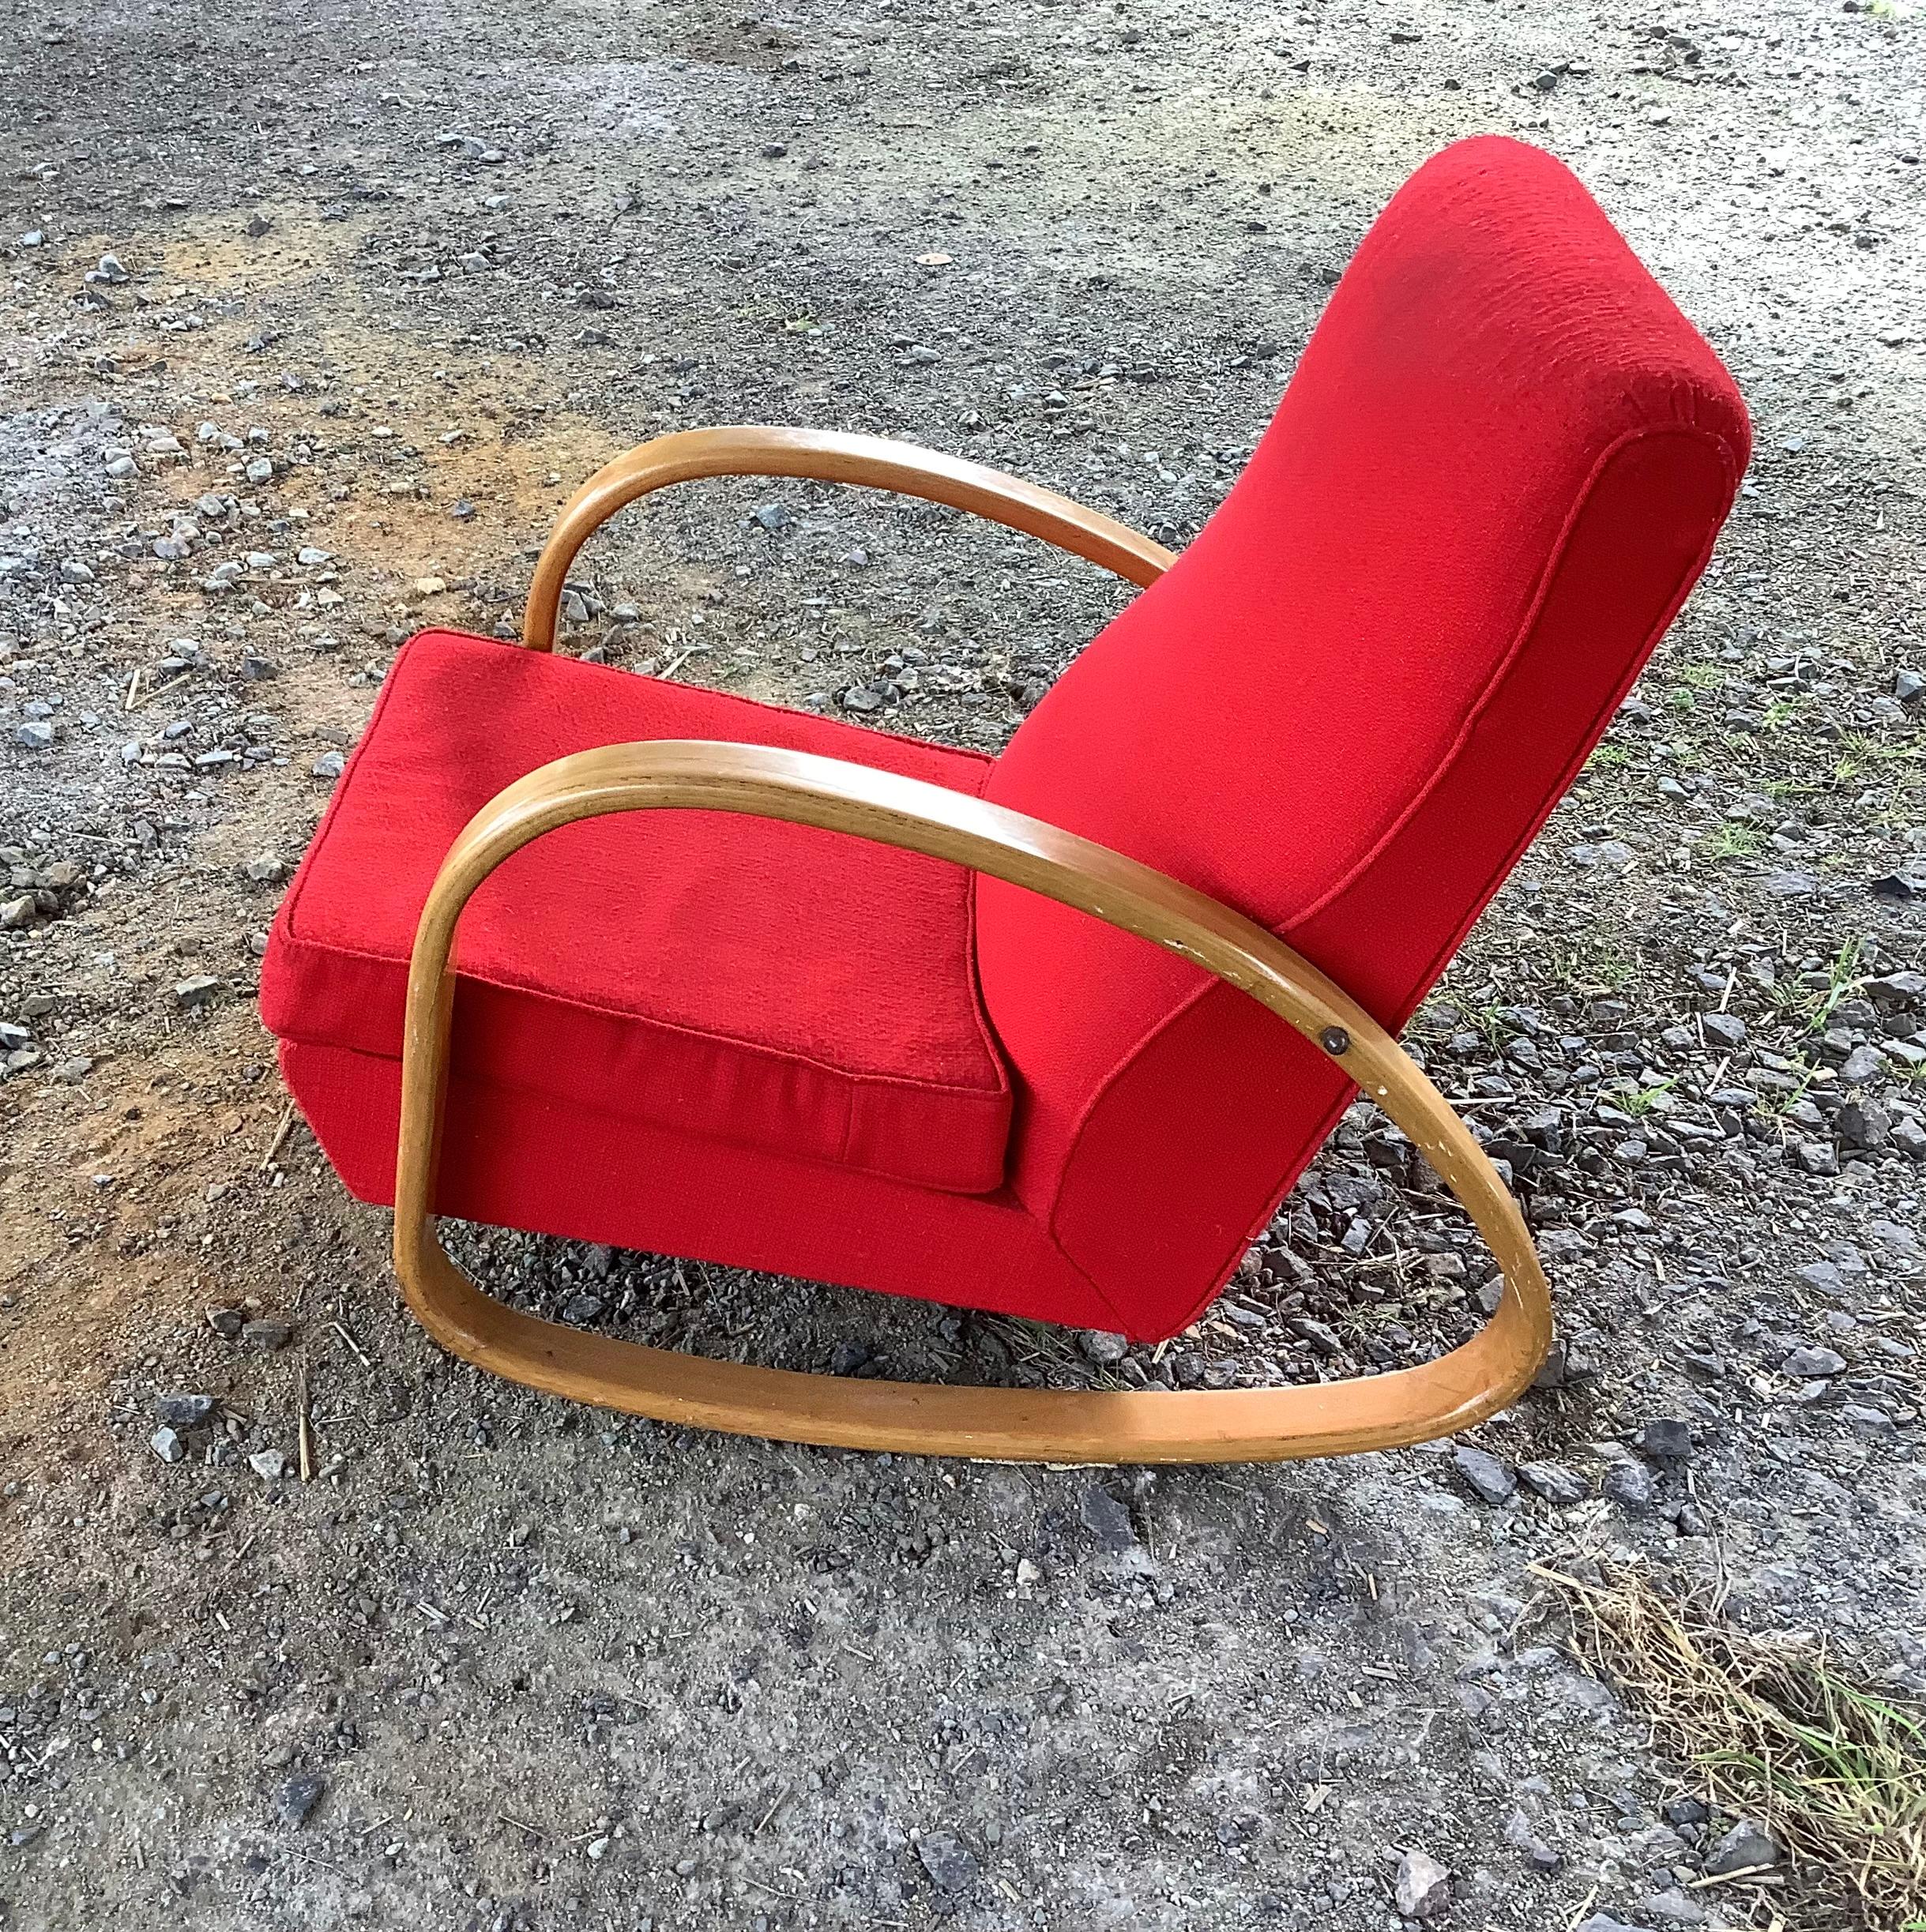 Well crafted rocking chair with steamed bent wooden arms